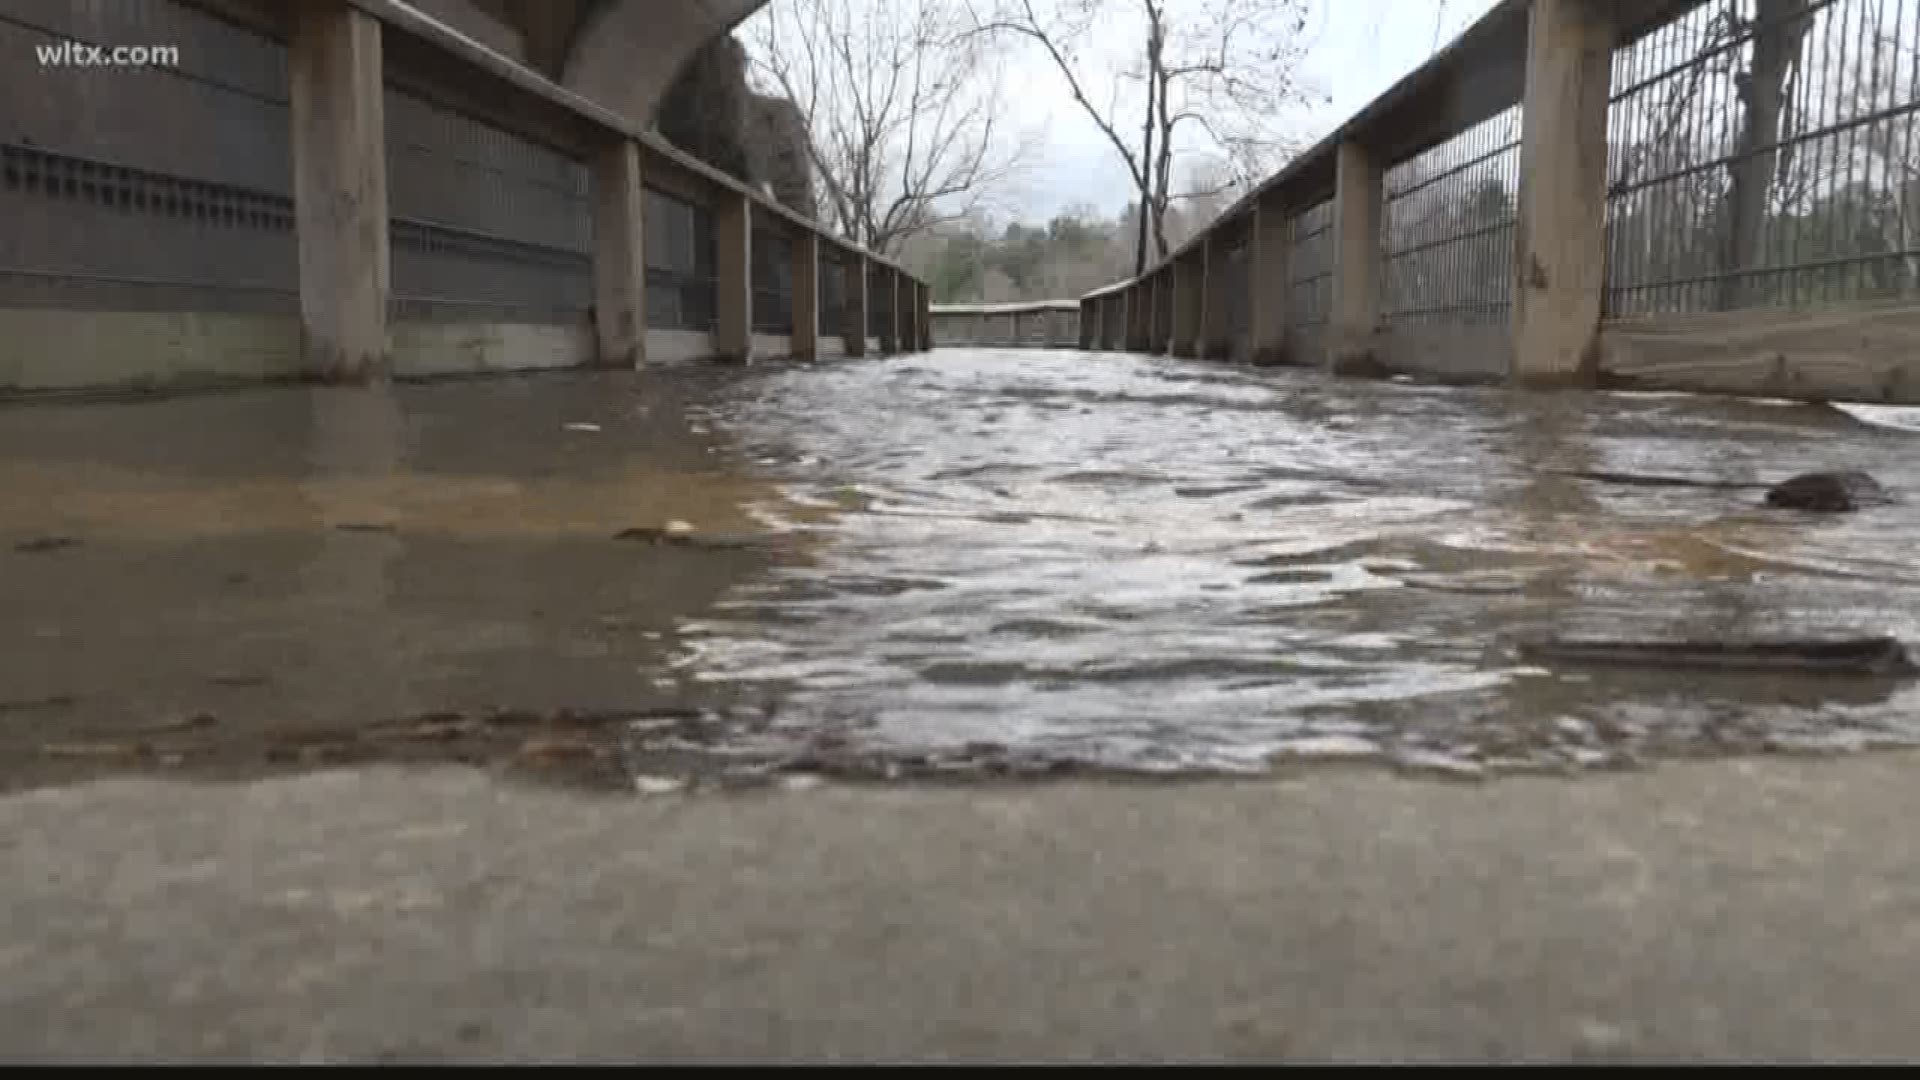 Portions of the Cayce and West Columbia Riverwalk are closed after several days of rain created flooding in the area.